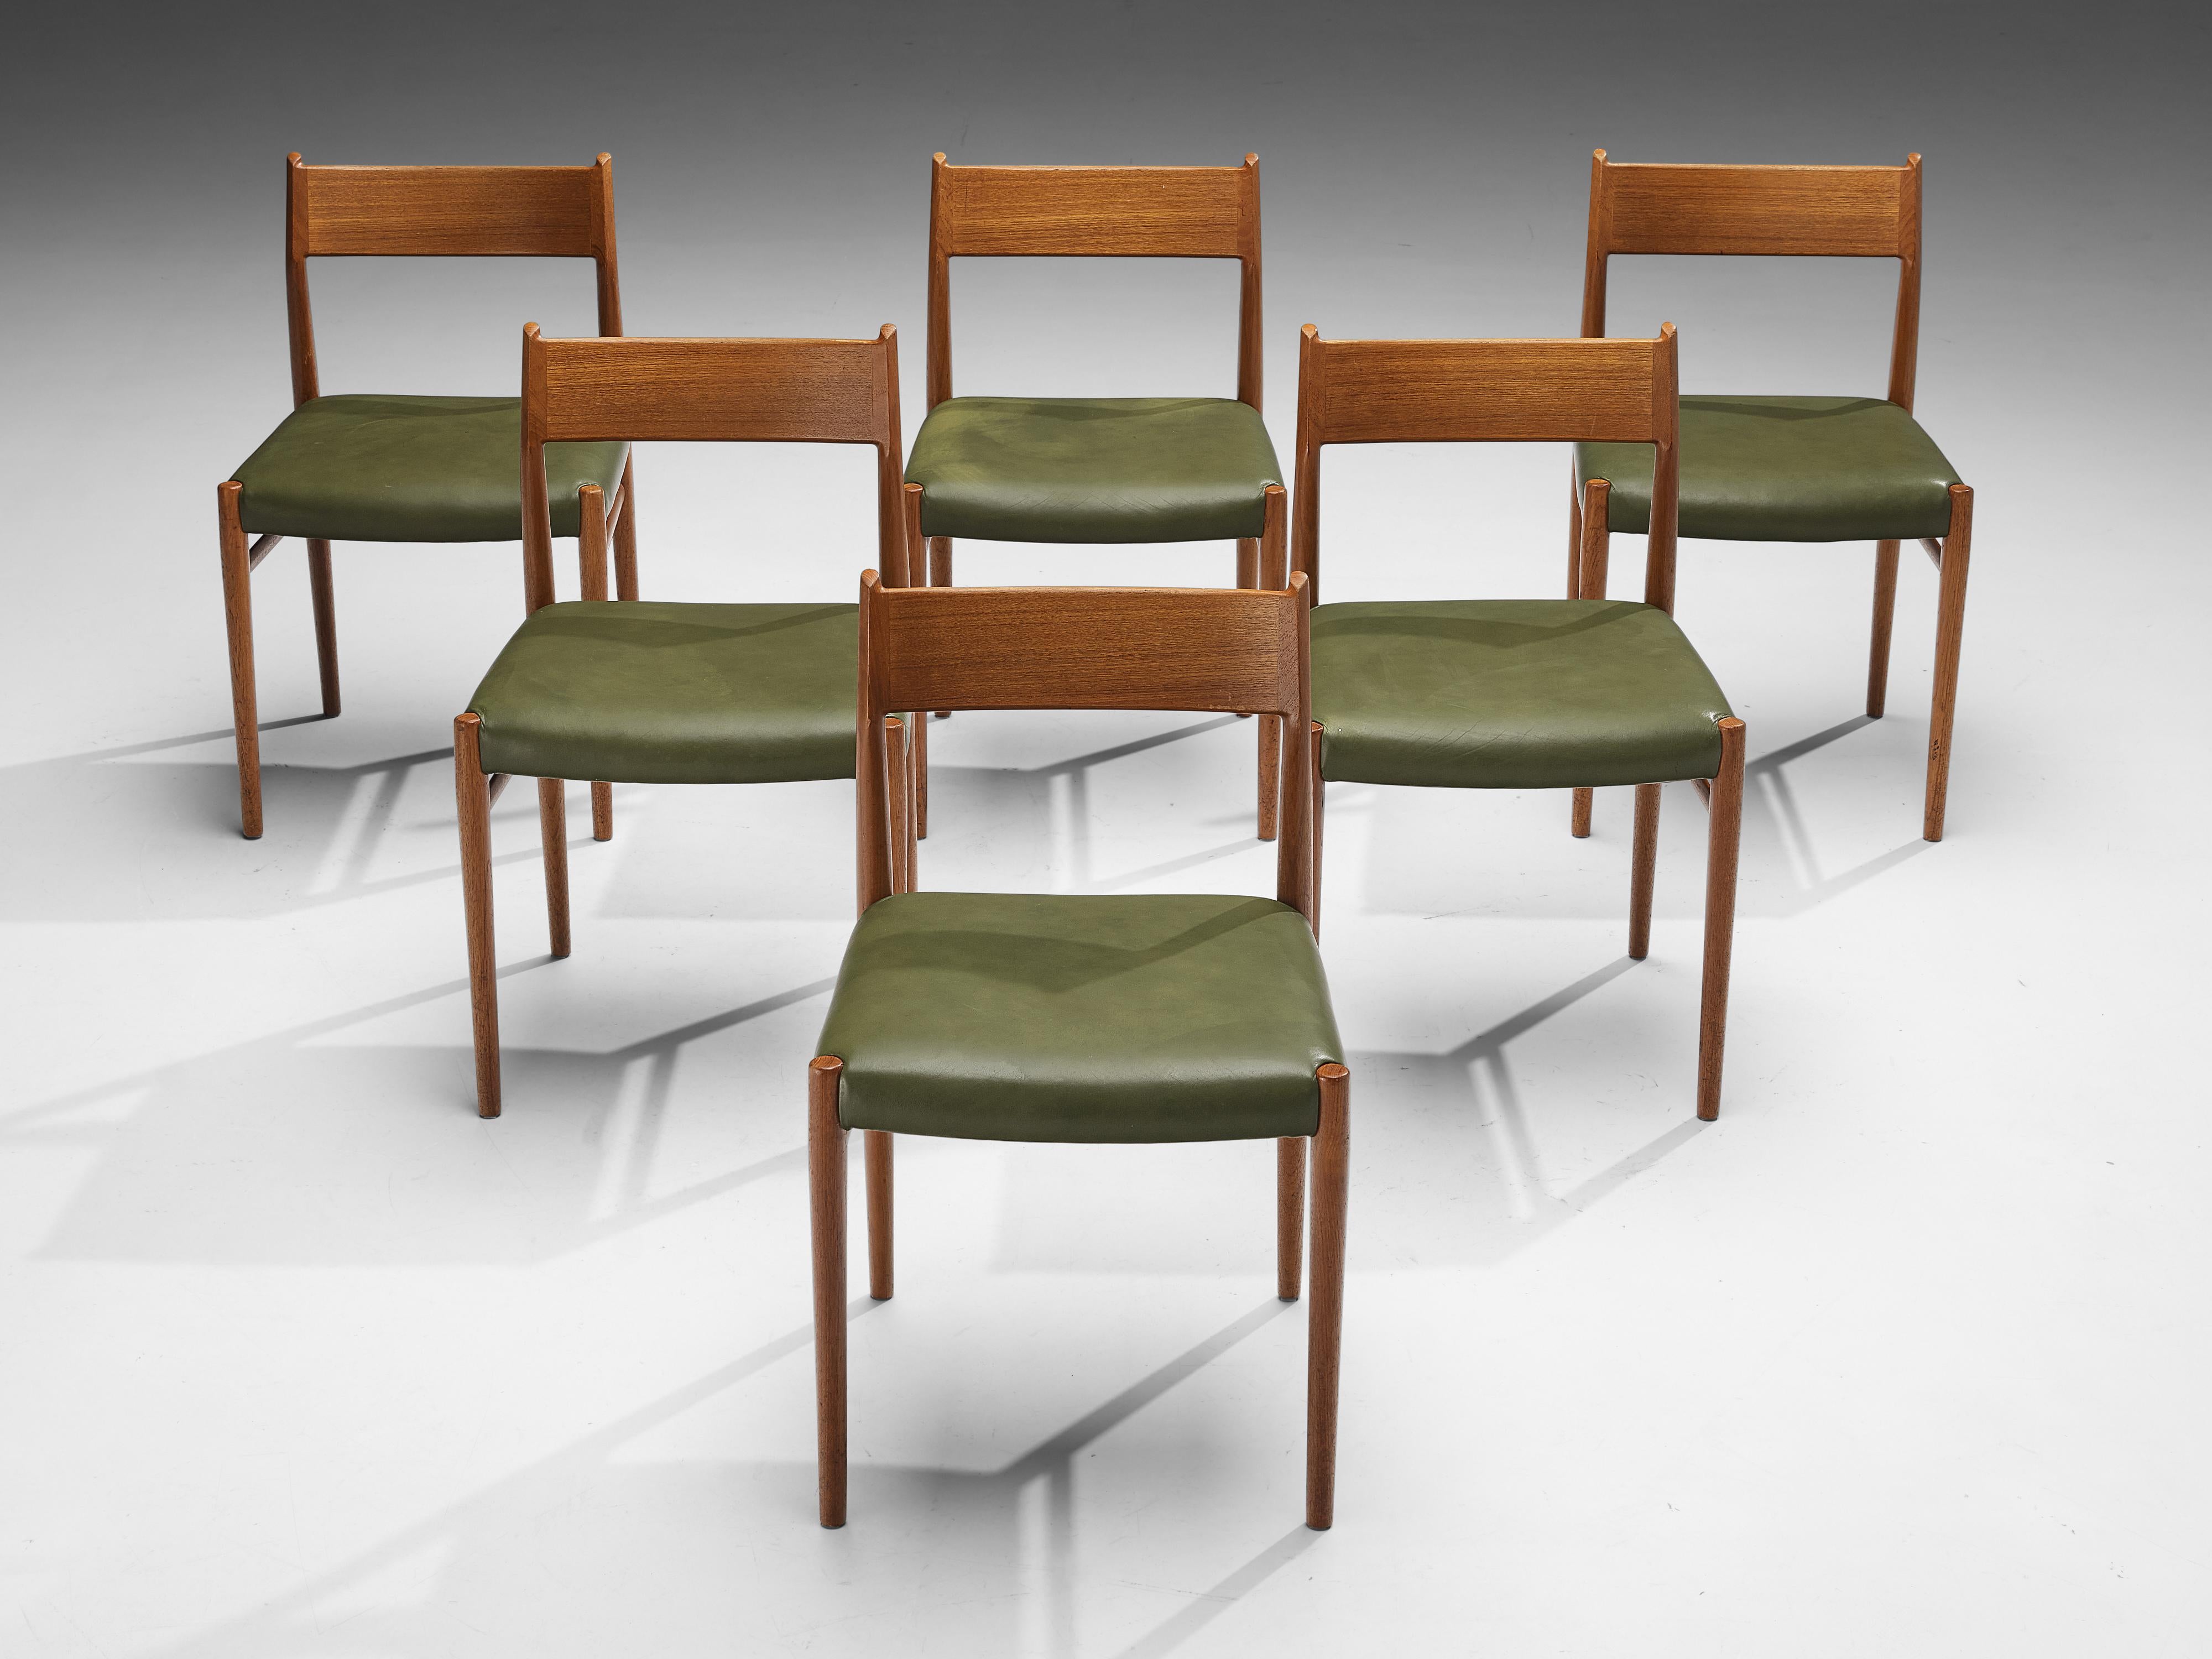 Arne Vodder for Sibast Møbler, set of six dining chairs model 418, leather and teak, Denmark, 1965 

Set of six modest dining chairs designed by the Danish designer Arne Vodder. These chairs feature beautiful, sleek and clear lines in the legs and